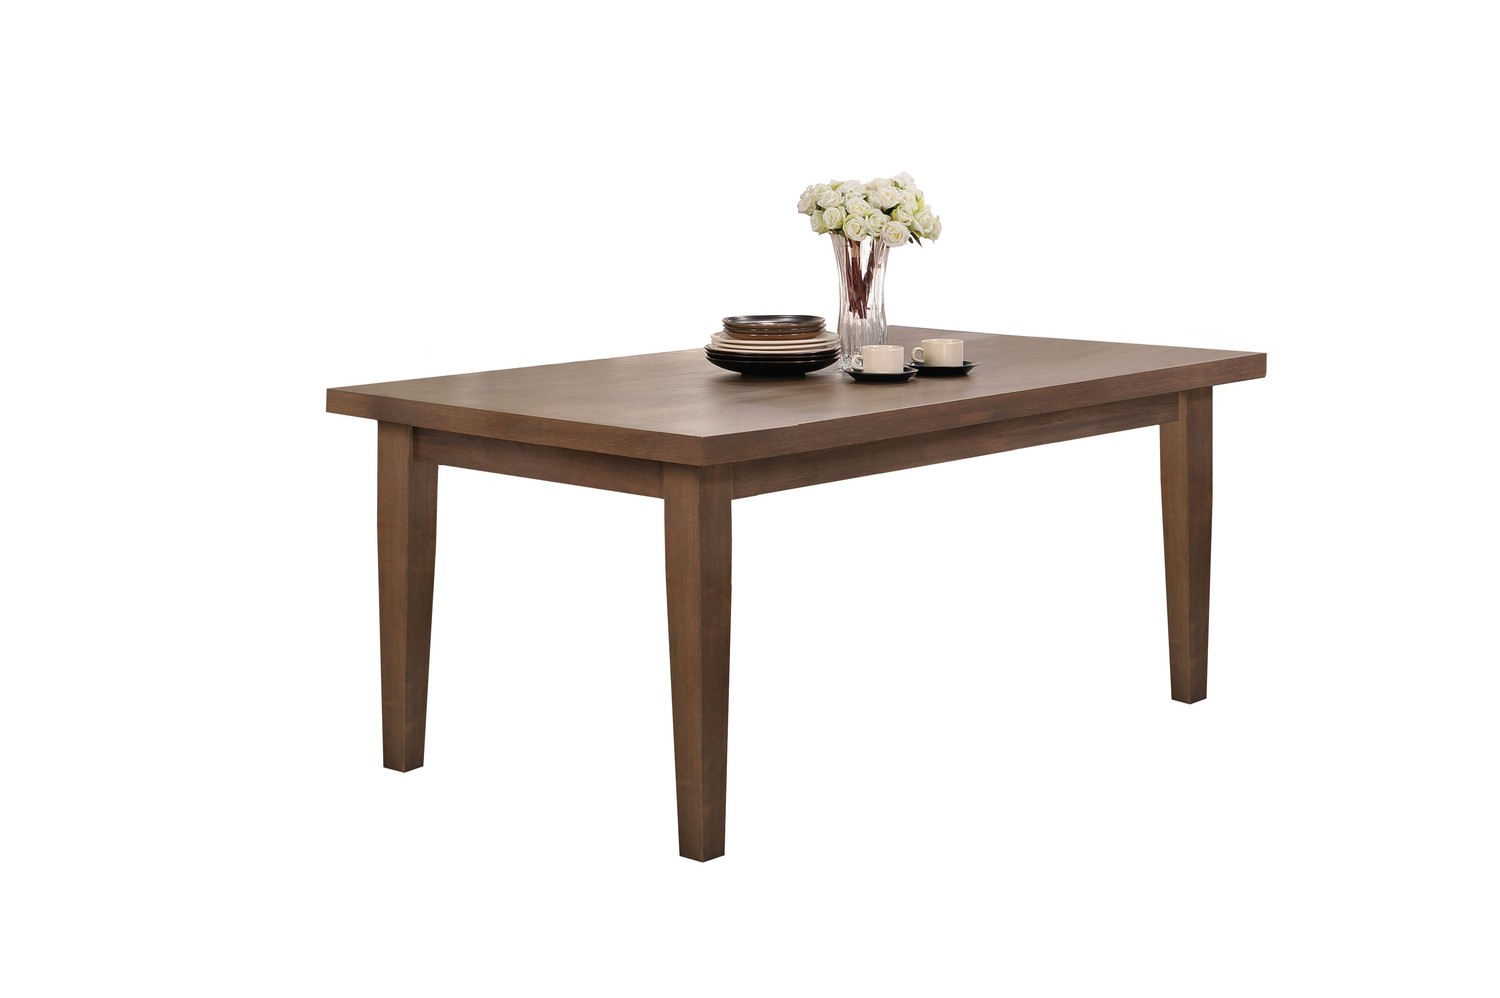 Wooden Top Weathered Oak Finish Dining Table